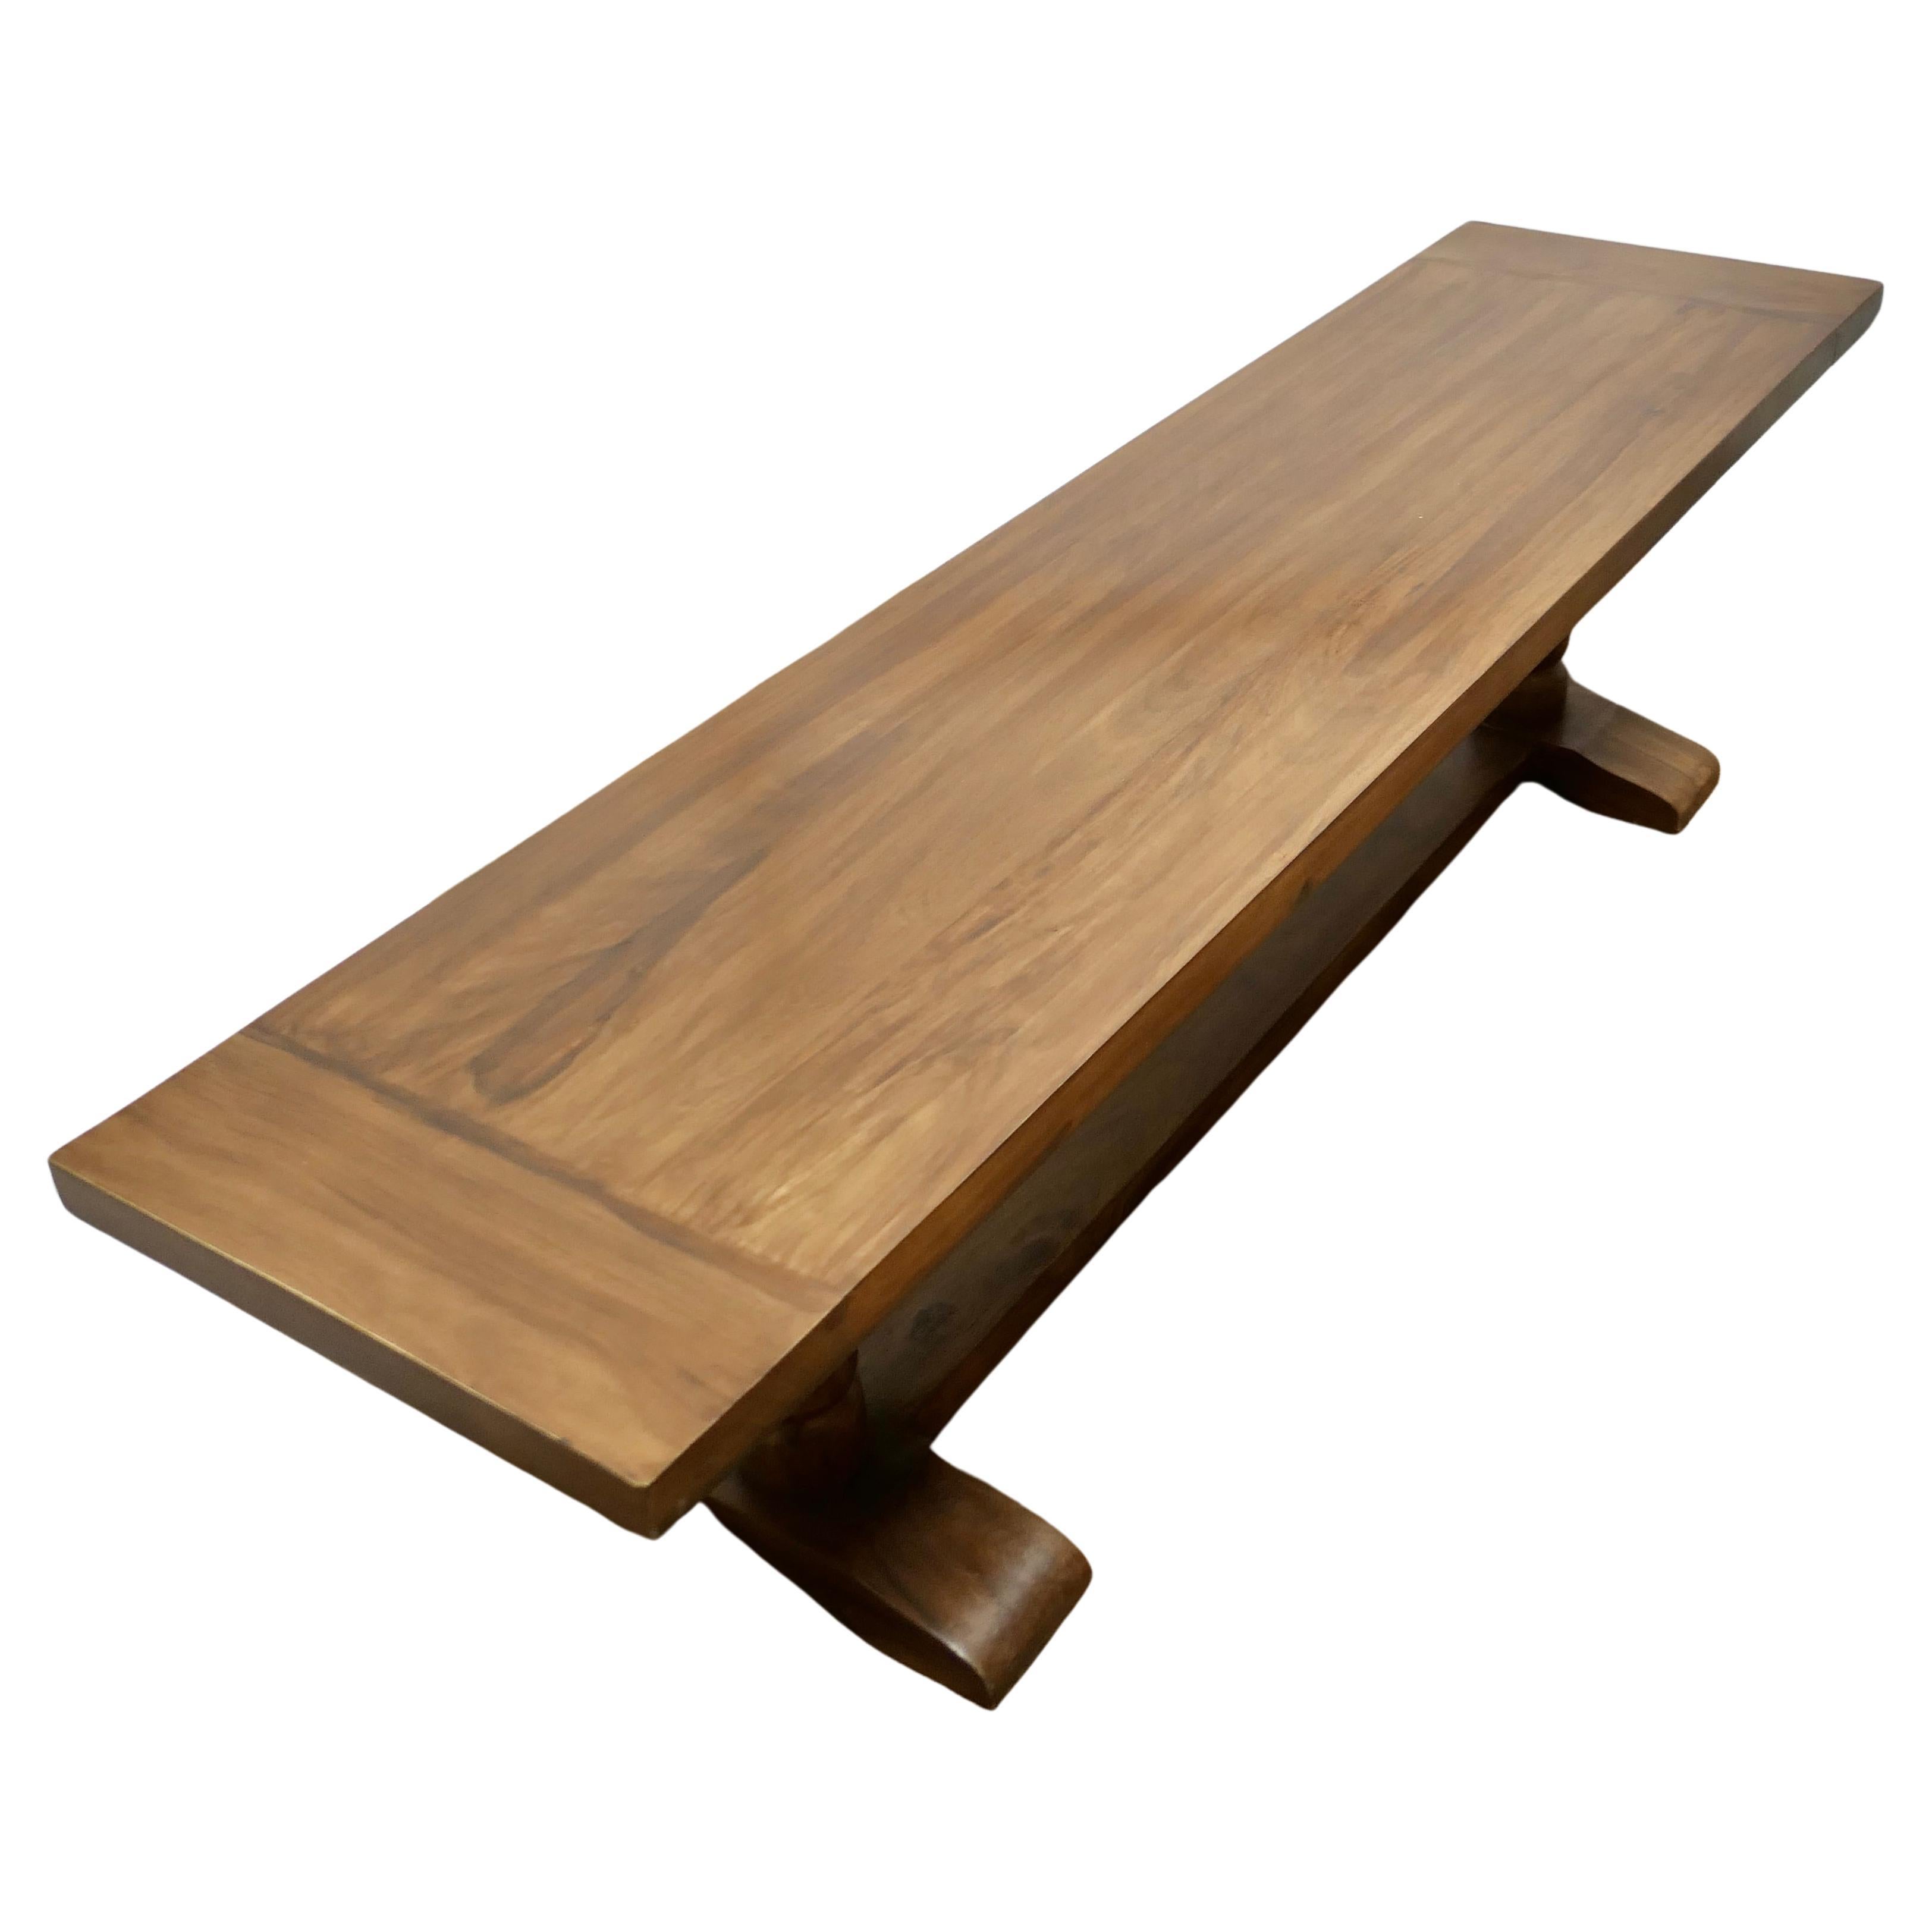 A Superb Very Long Walnut Coffee Table

This is a lovely looking piece it is very heavy and in the refectory style The Table has a 2” thick plank top, cleated at the ends and sturdy gun barrel legs 
The table is good and sound, it is very heavy and